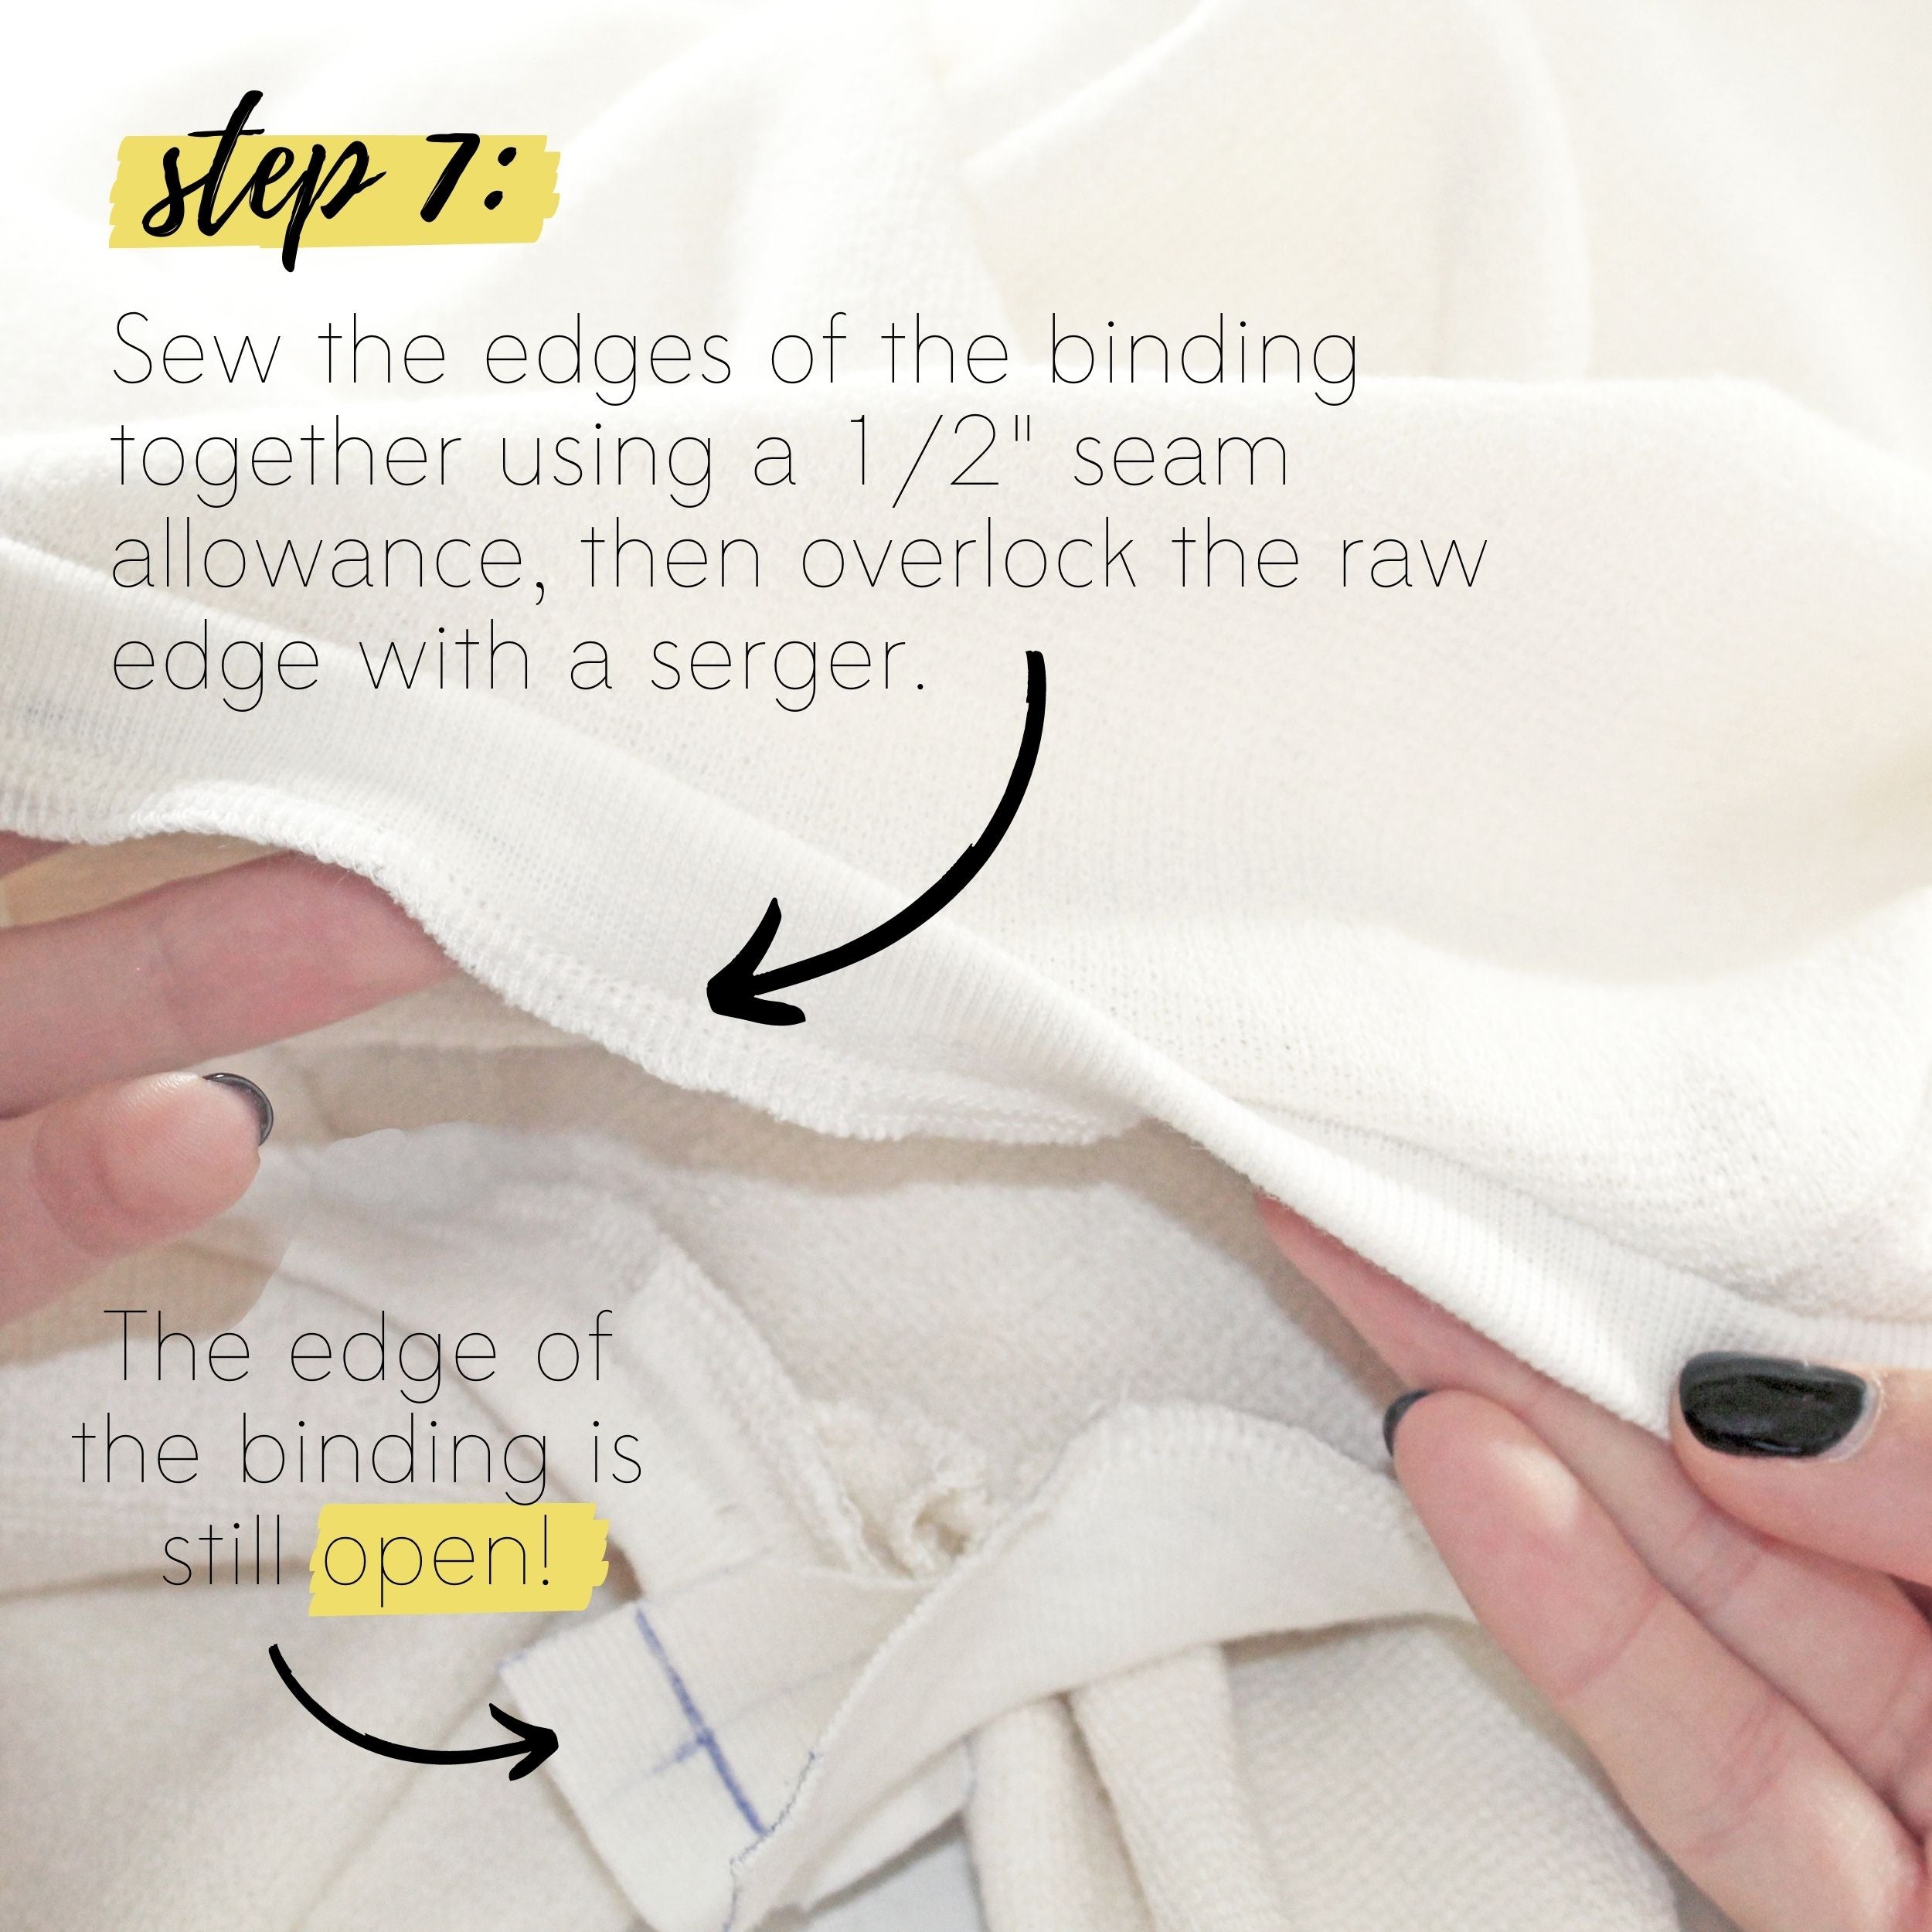 How To Sew A Knit Seam Binding Sewing Tutorial: Step 7